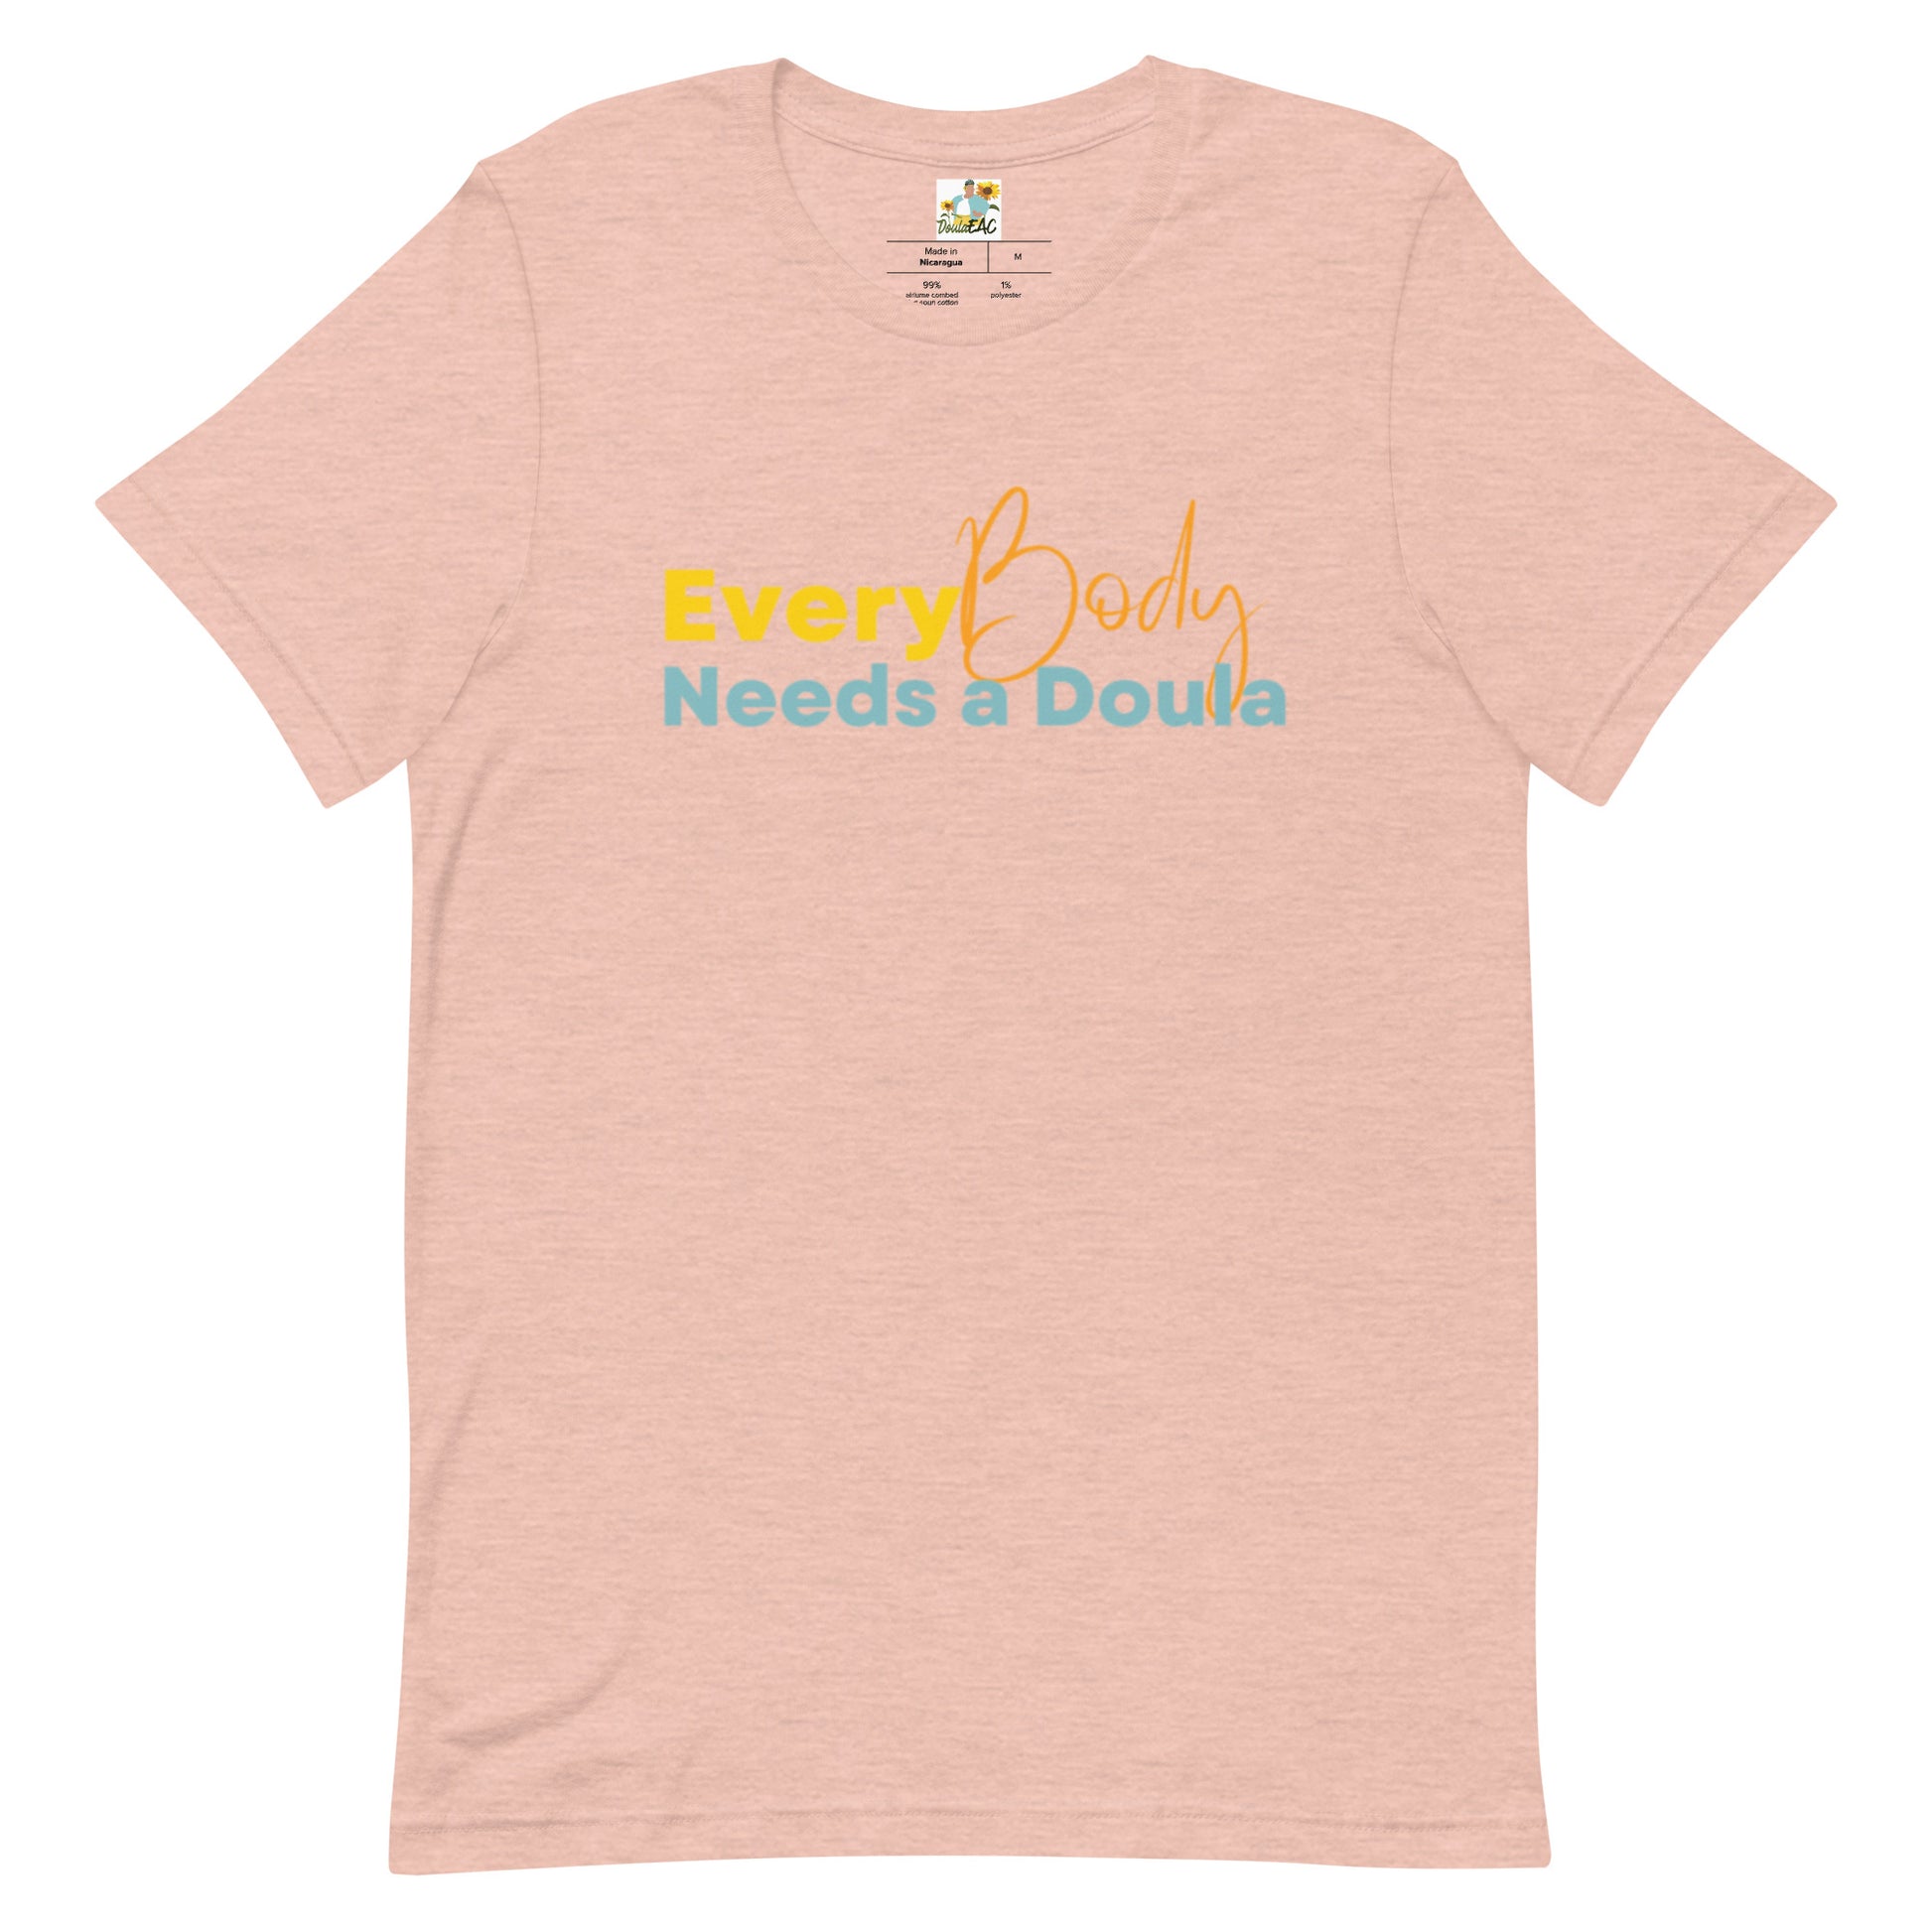 Everybody Needs a Doula Tee - Designs by Doula EAC, the DMV's premier doula service!